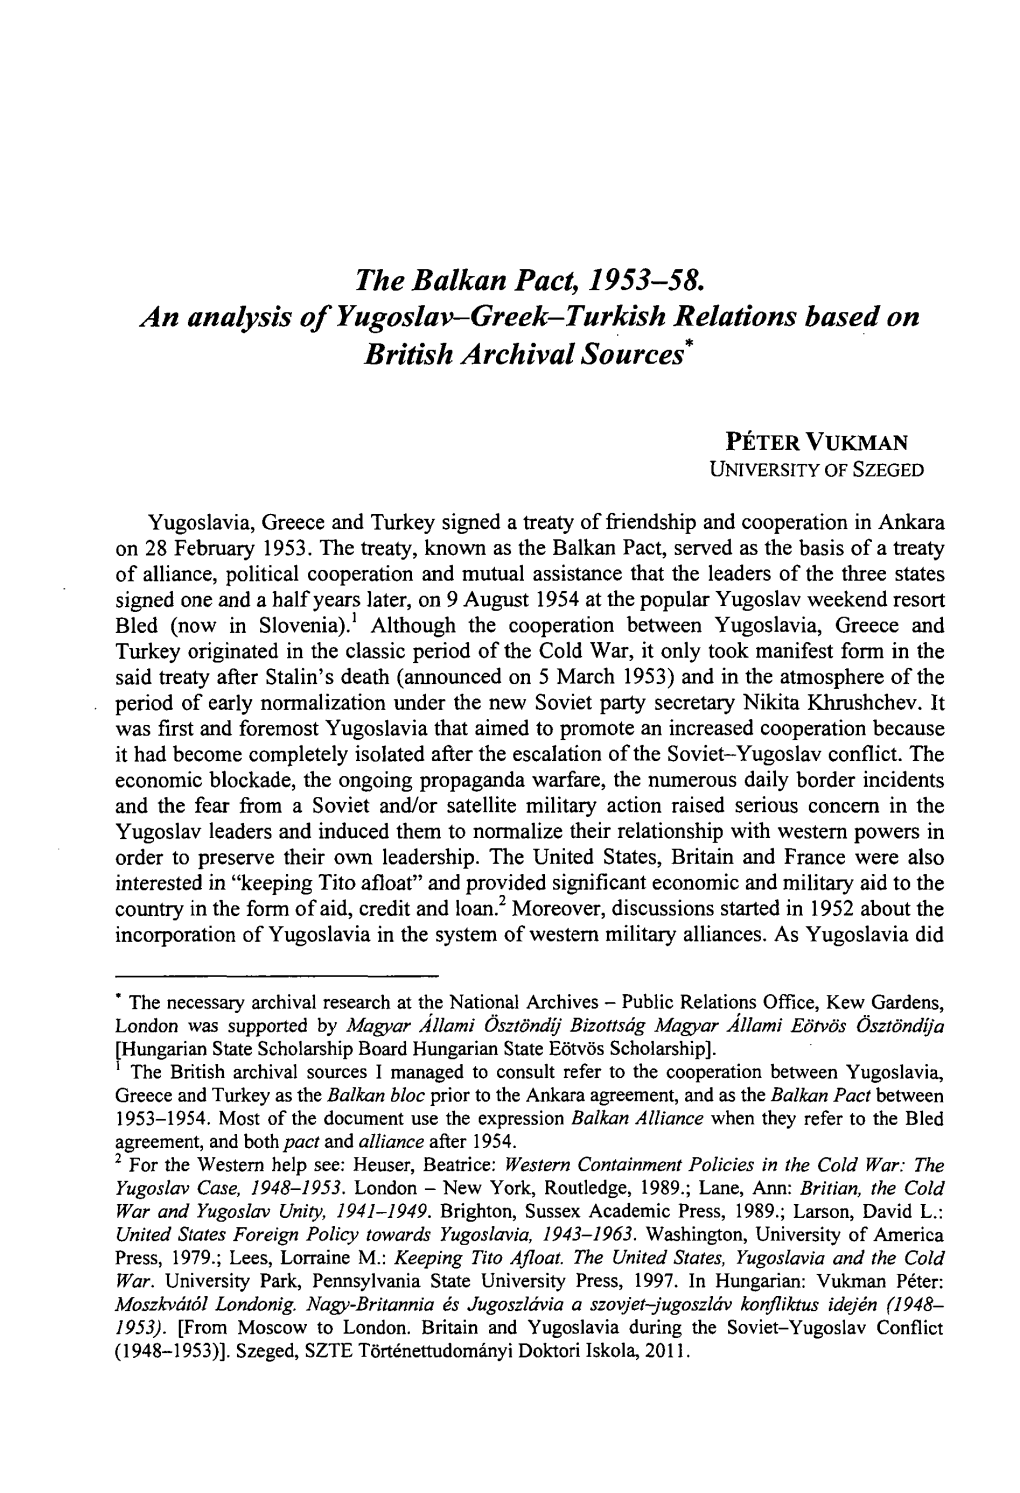 The Balkan Pact, 1953-58. an Analysis of Yugoslav-Greek—Turkish Relations Based on British Archival Sources*